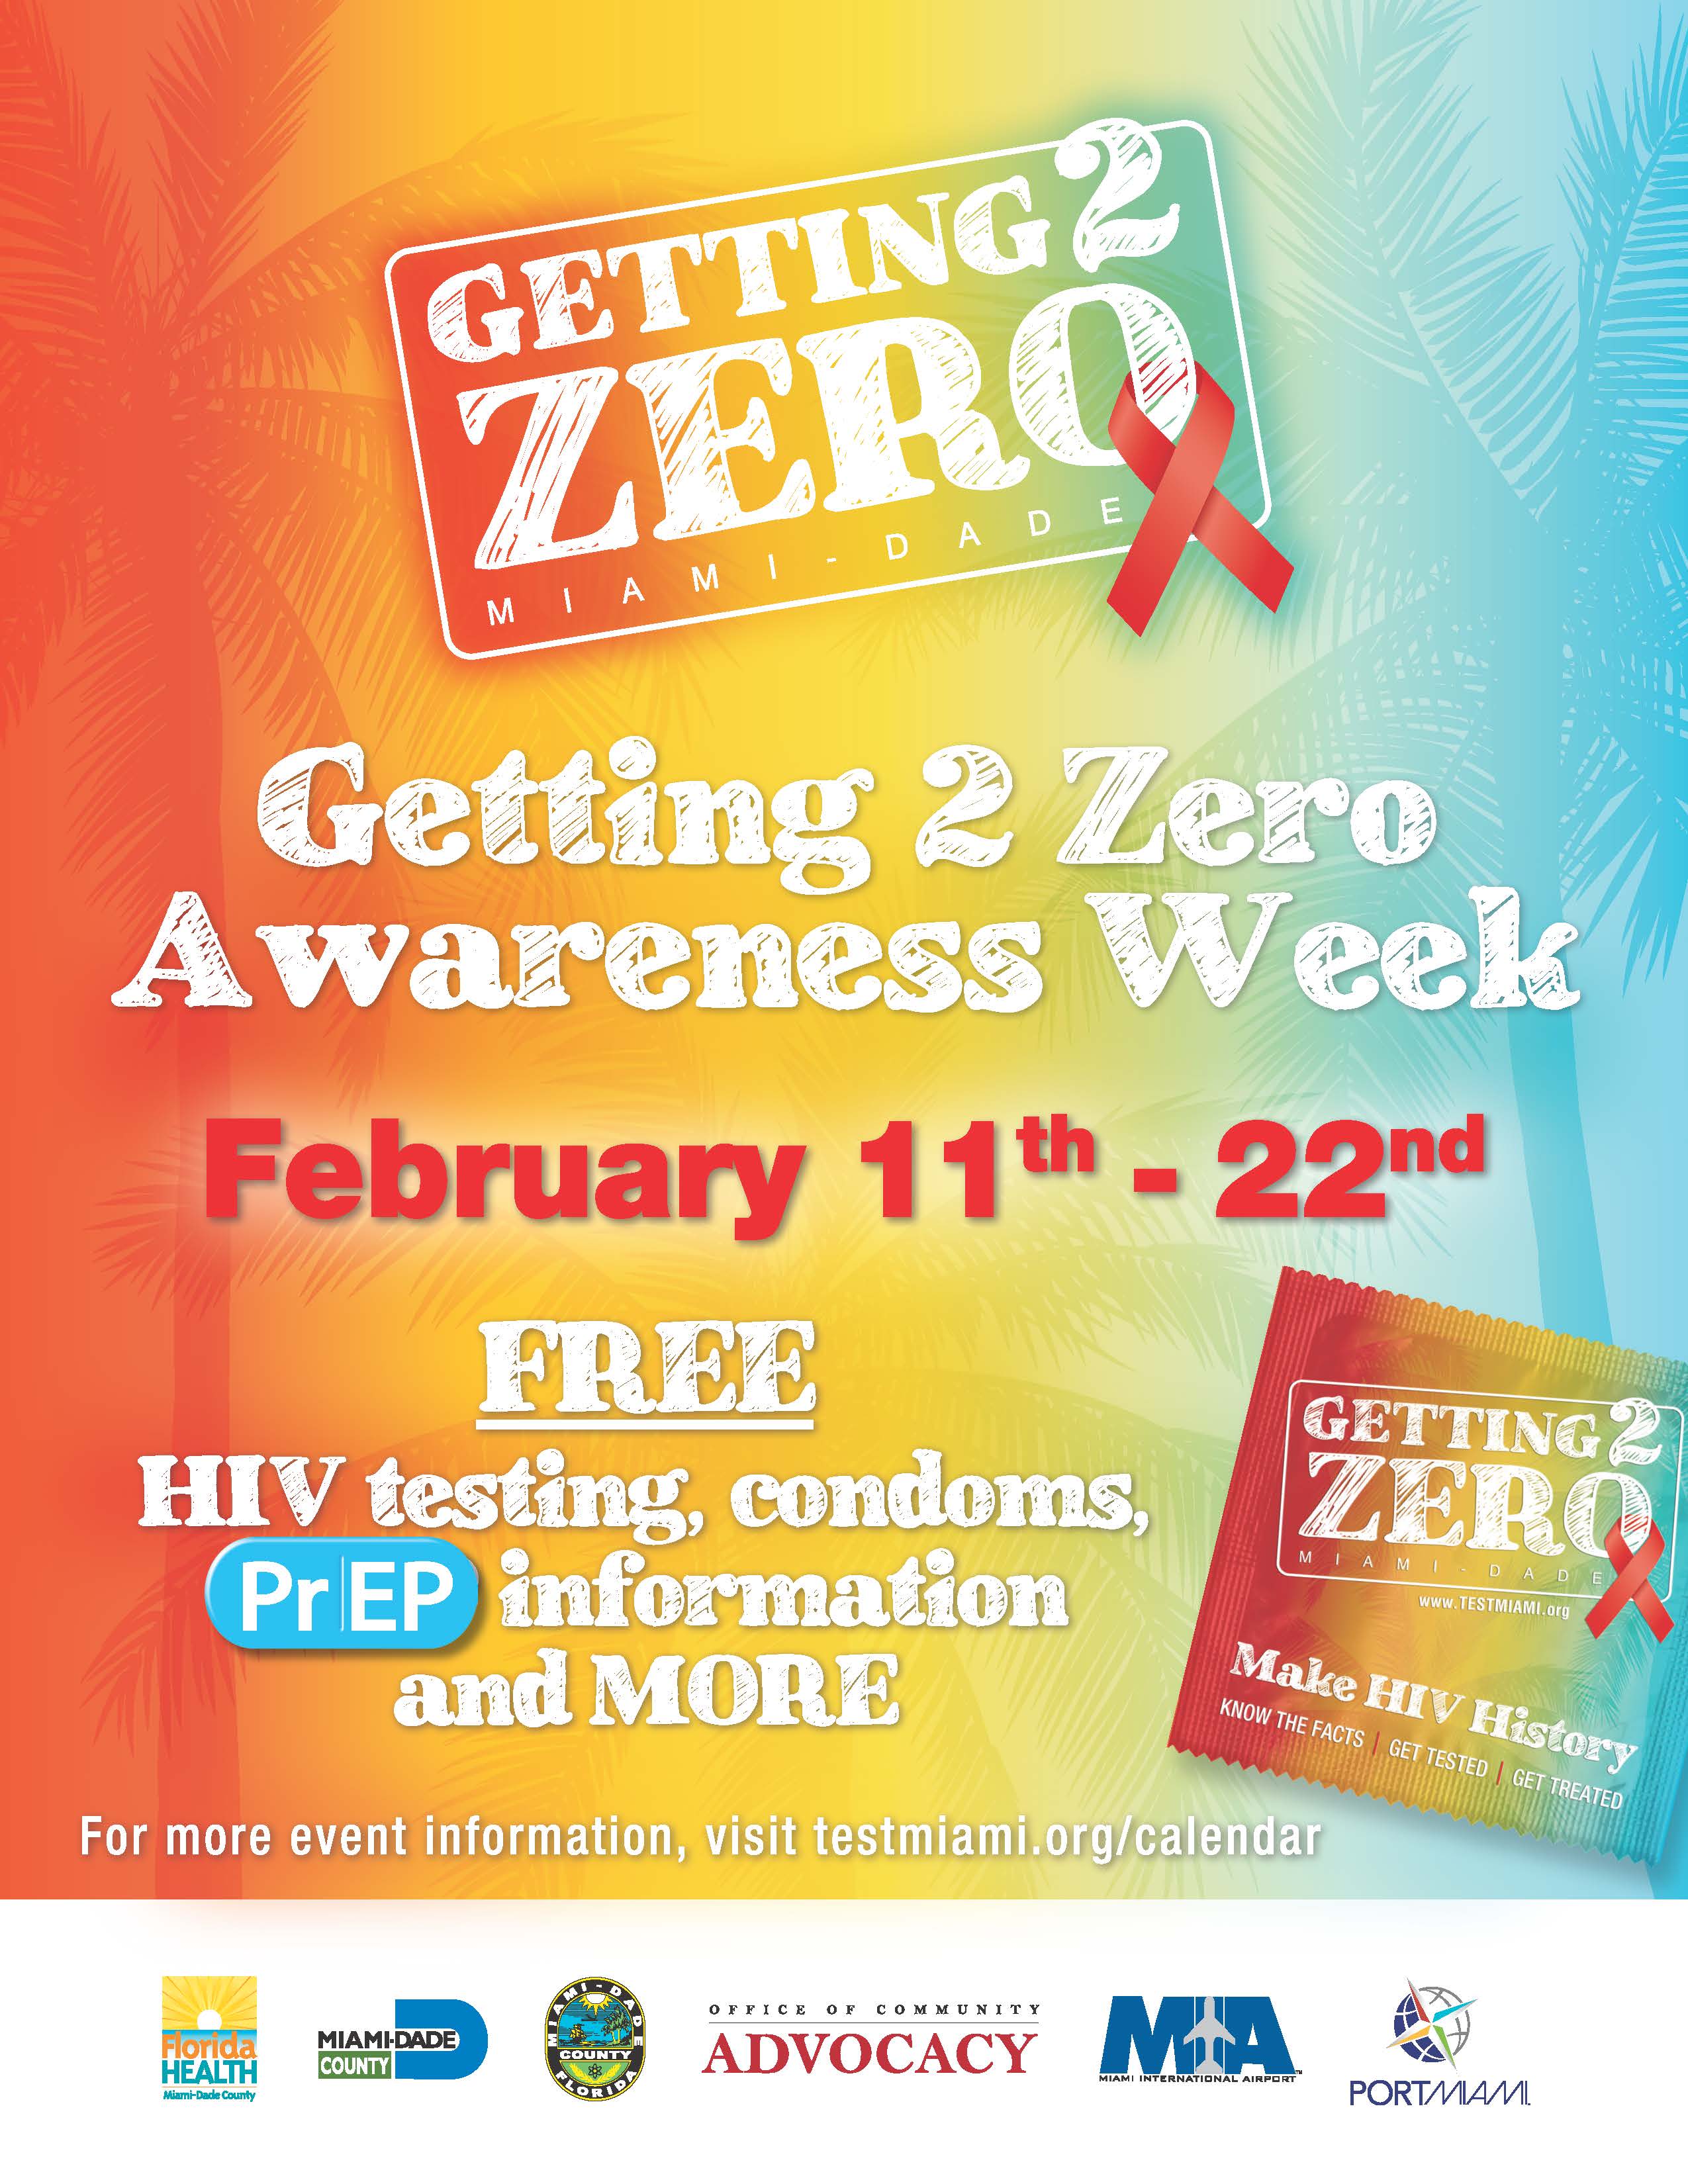 Getting 2 Zero Event Flyer page 1